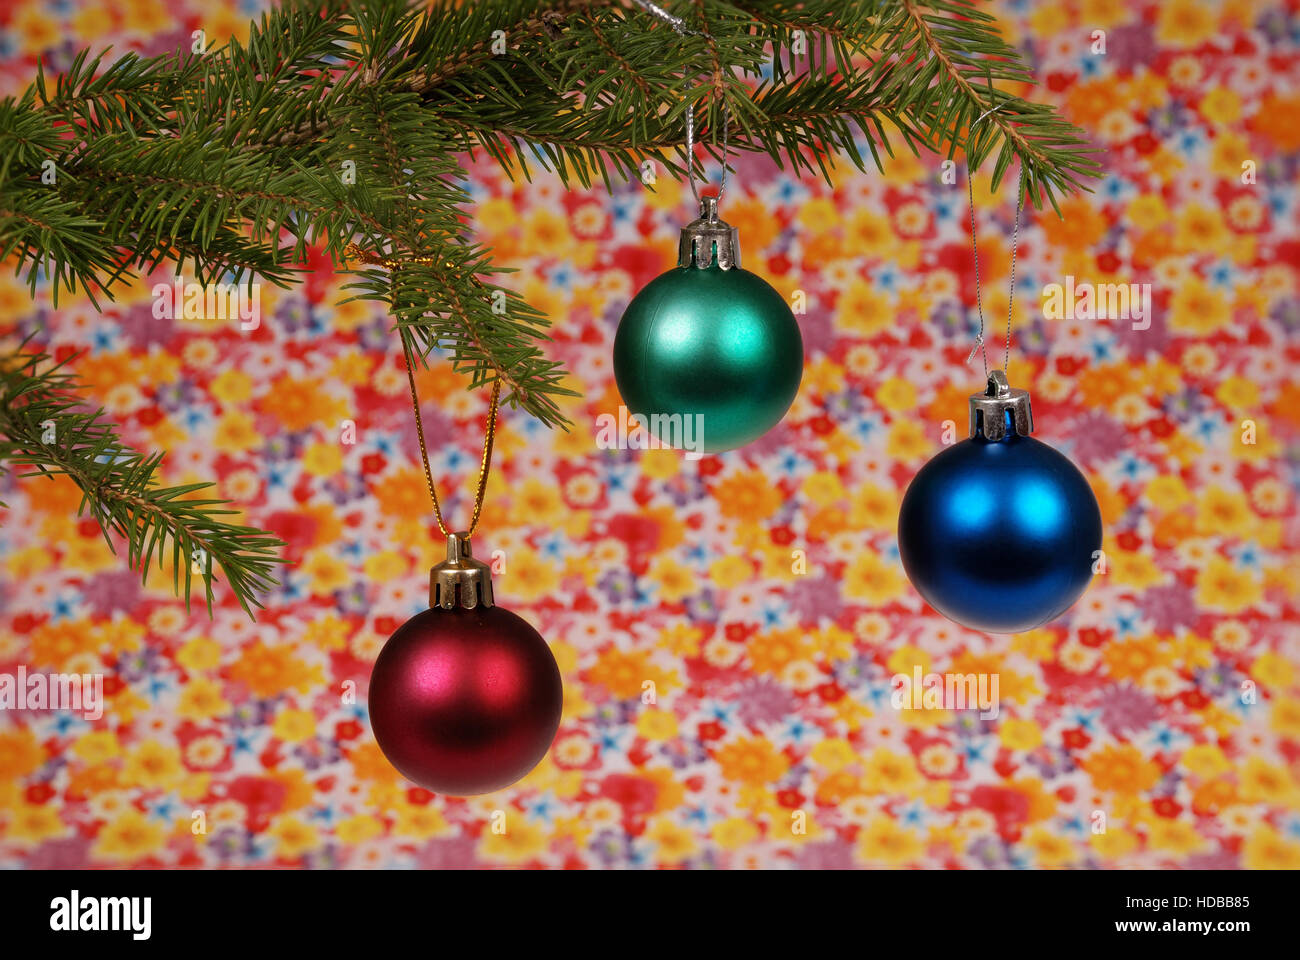 Green christmas tree outfit christmas toys red green blue wallpaper background stock photo